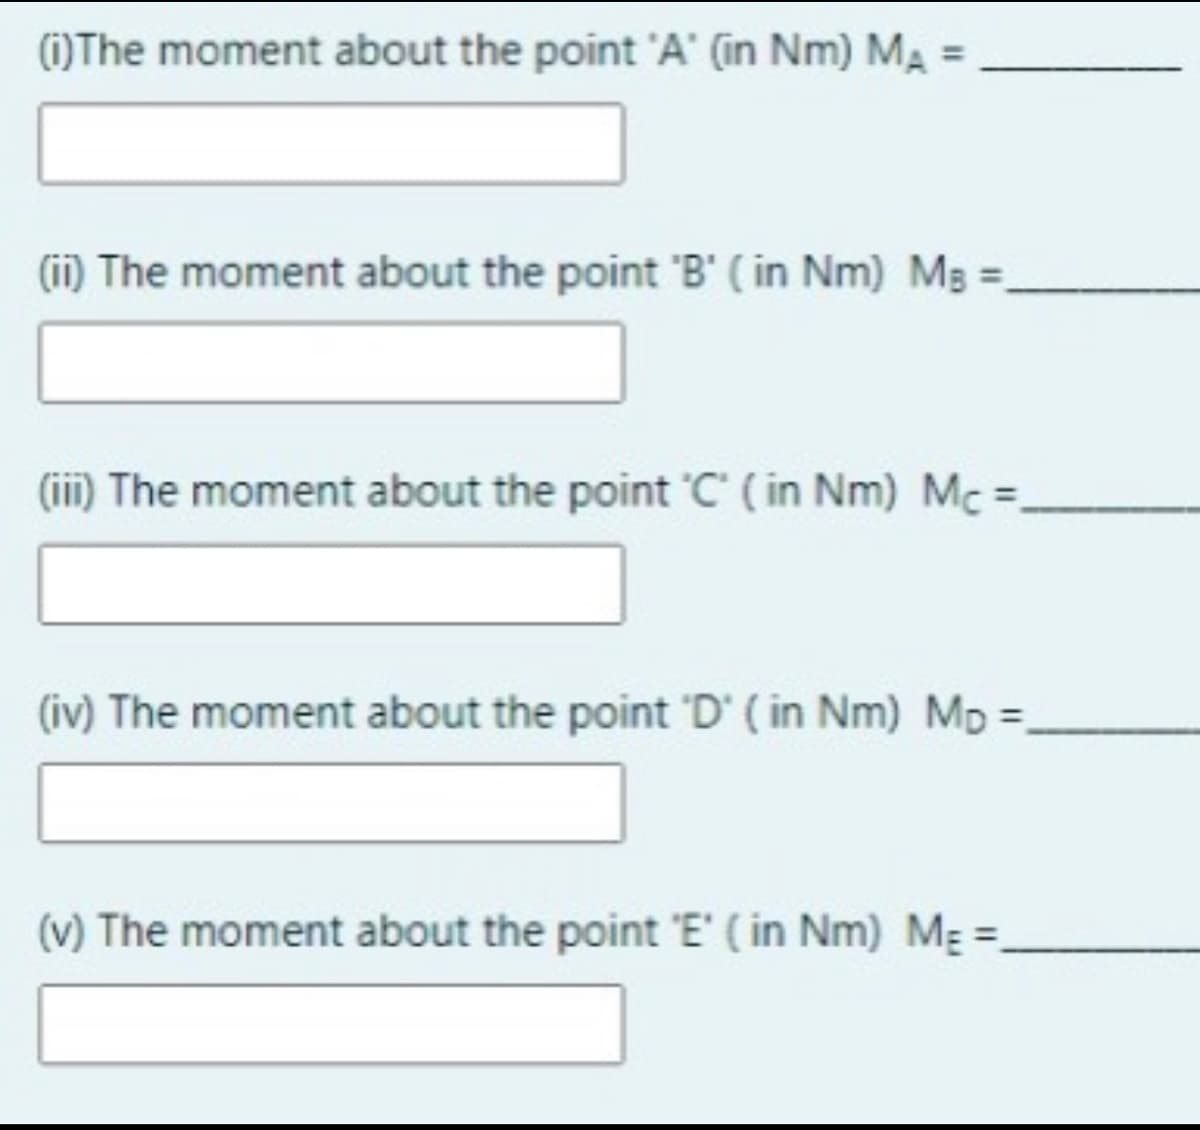 (1)The moment about the point 'A' (in Nm) MA =
(i) The moment about the point 'B' ( in Nm) Mg =,
(ii) The moment about the point 'C' ( in Nm) Mc =,
(iv) The moment about the point 'D' ( in Nm) Mp =
(v) The moment about the point 'E' ( in Nm) MẸ =.
